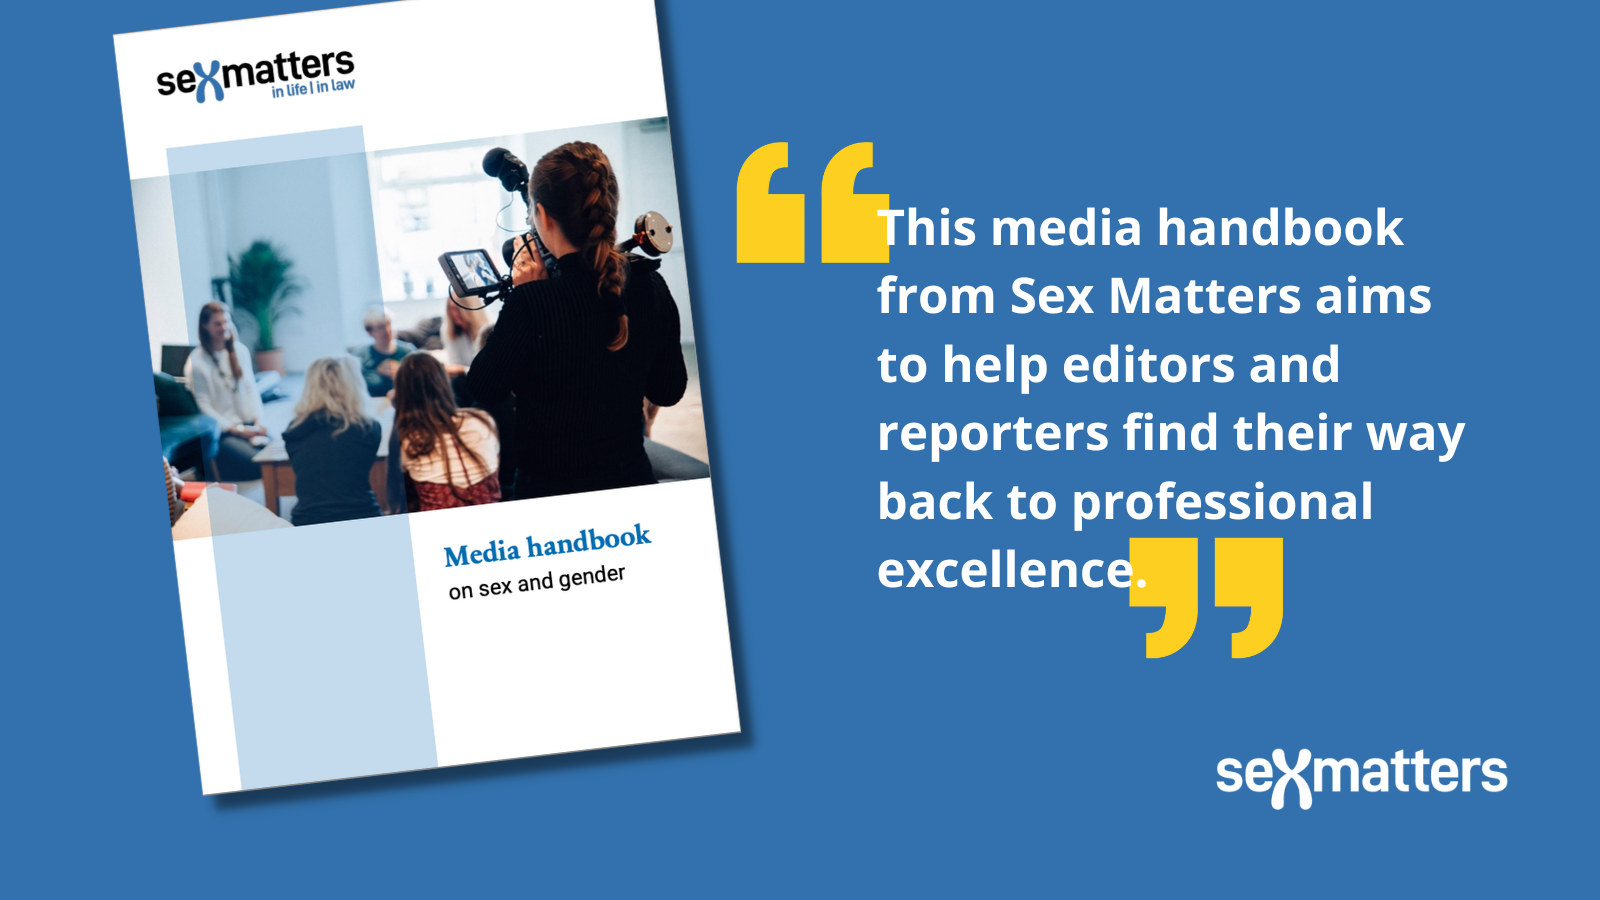 This media handbook from Sex Matters aims to help editors and reporters find their way back to professional excellence.